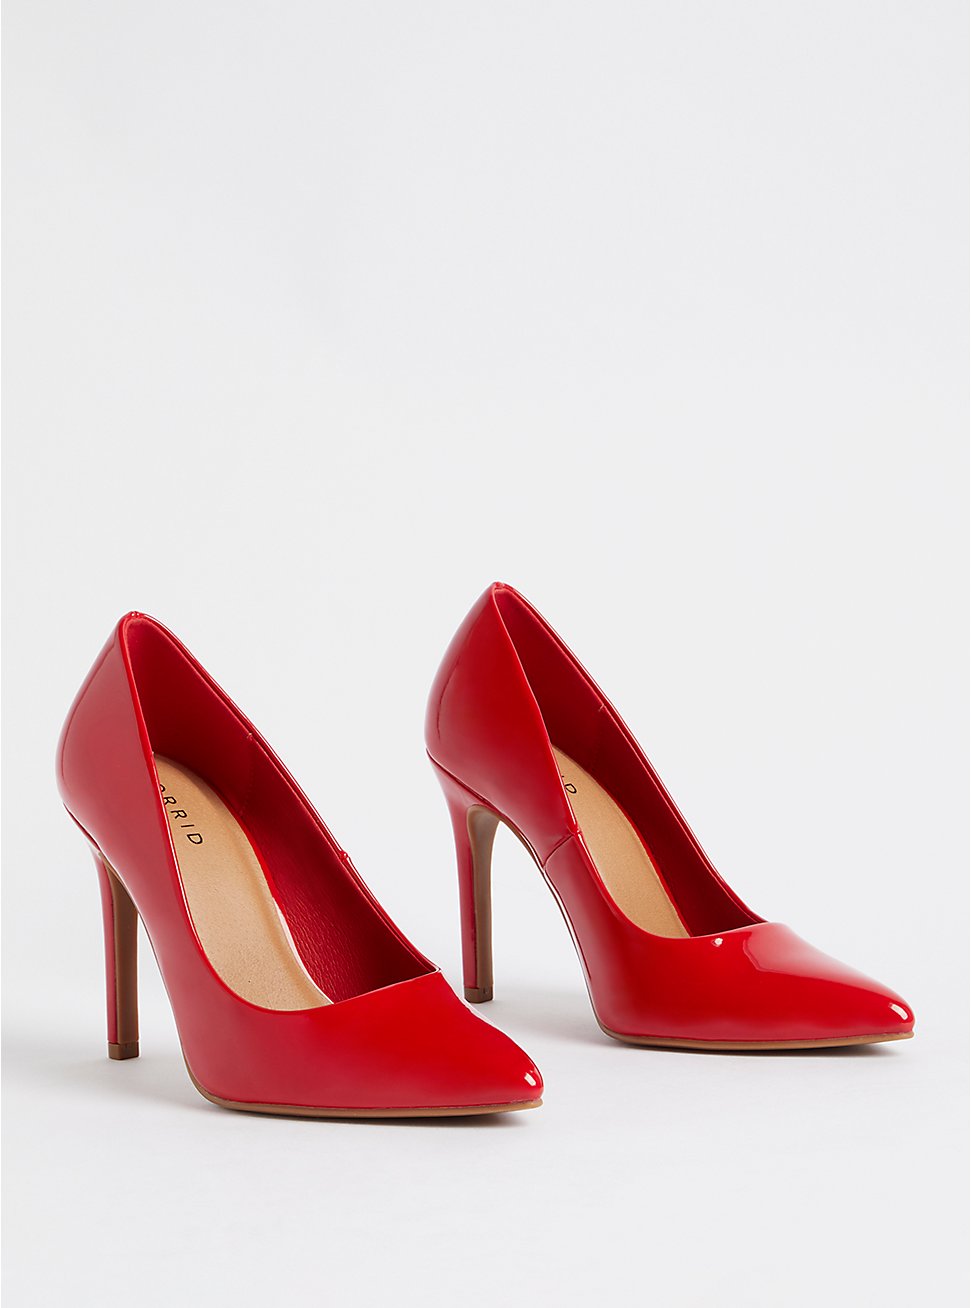 Pointed Toe Stiletto Pump (WW), RED, hi-res